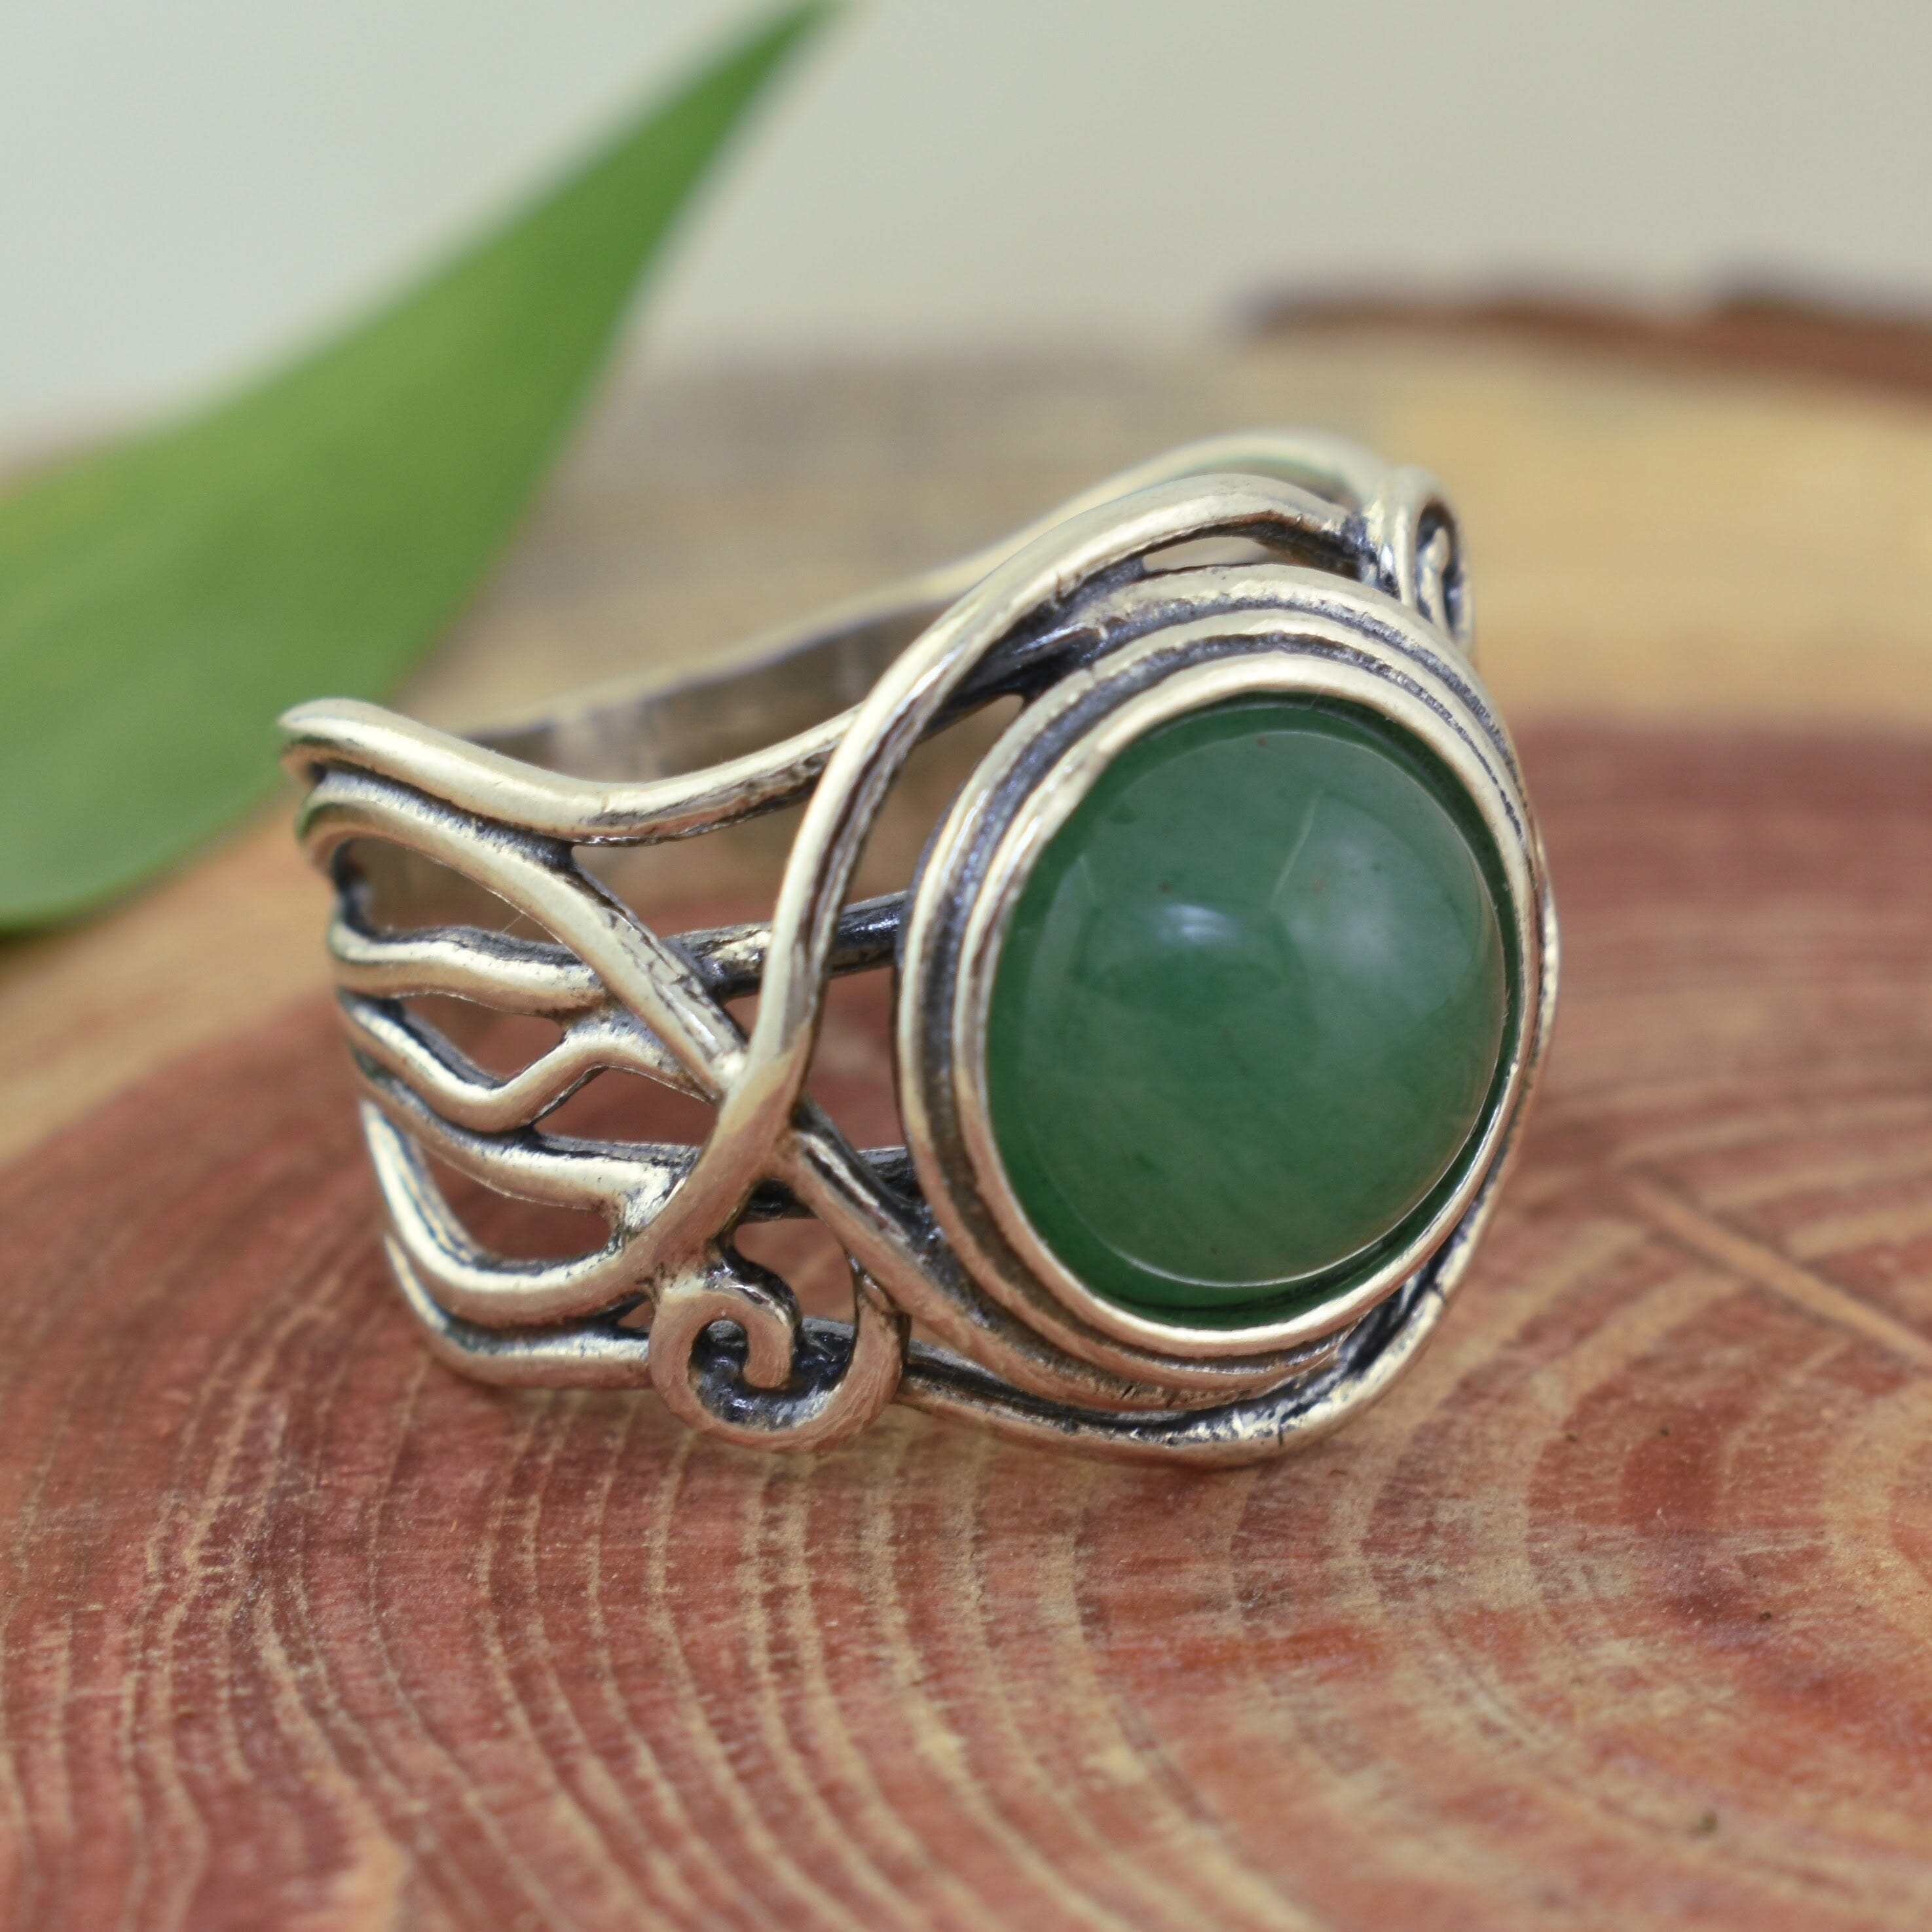 .925 sterling silver ring with round green aventurine stone